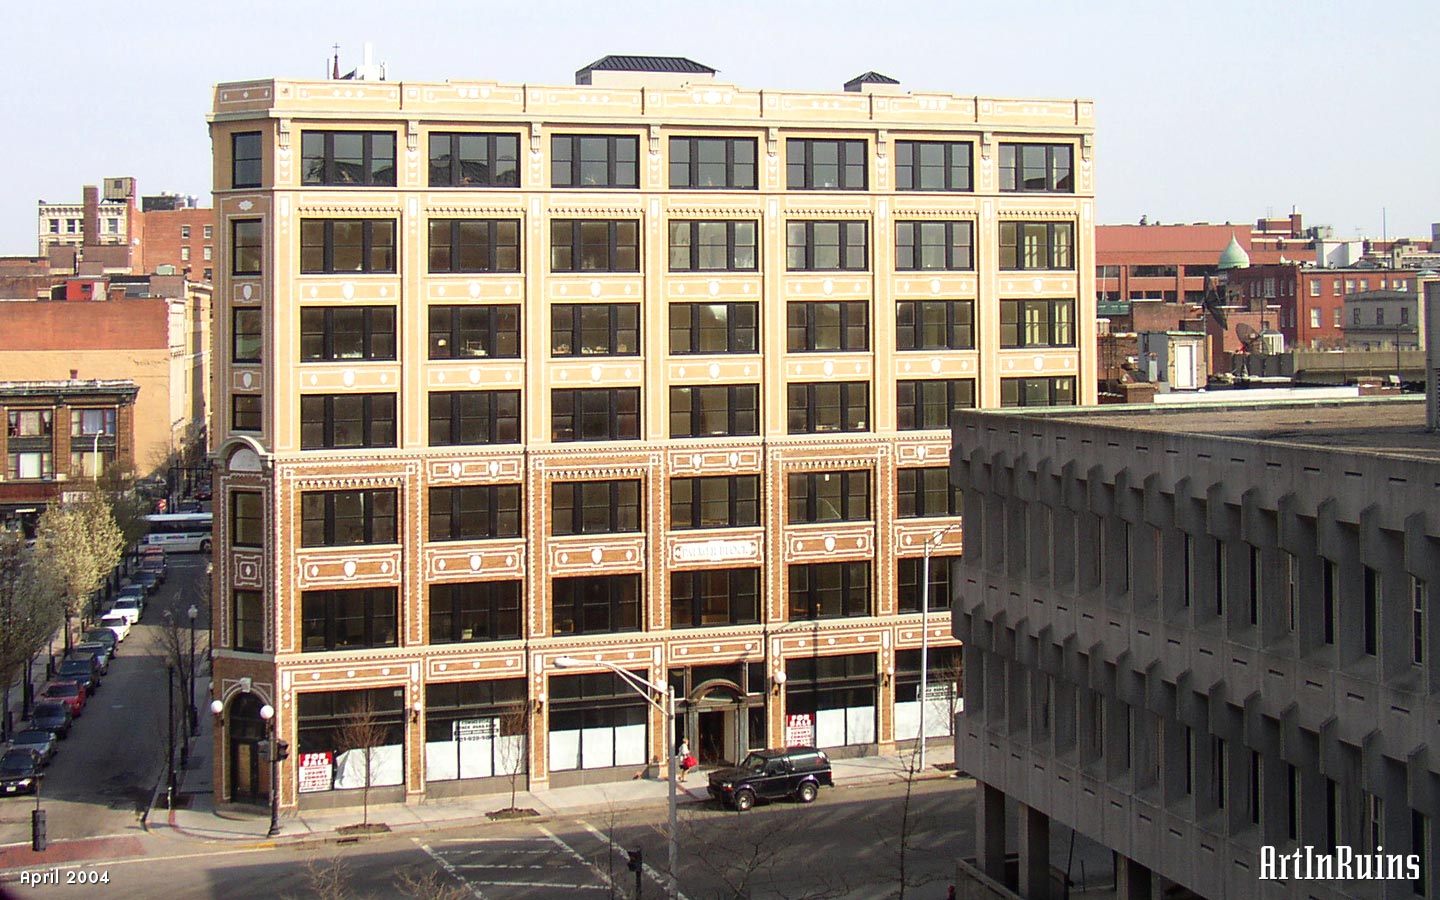 Yellow and white brick patterns in the facade of this building are geometric and ornamental. The first three stories are a darker yellow brick color than the upper four stories. The decorative designs stop at the top of the third floor and then start again, further indicating that these two sections were built at different times.